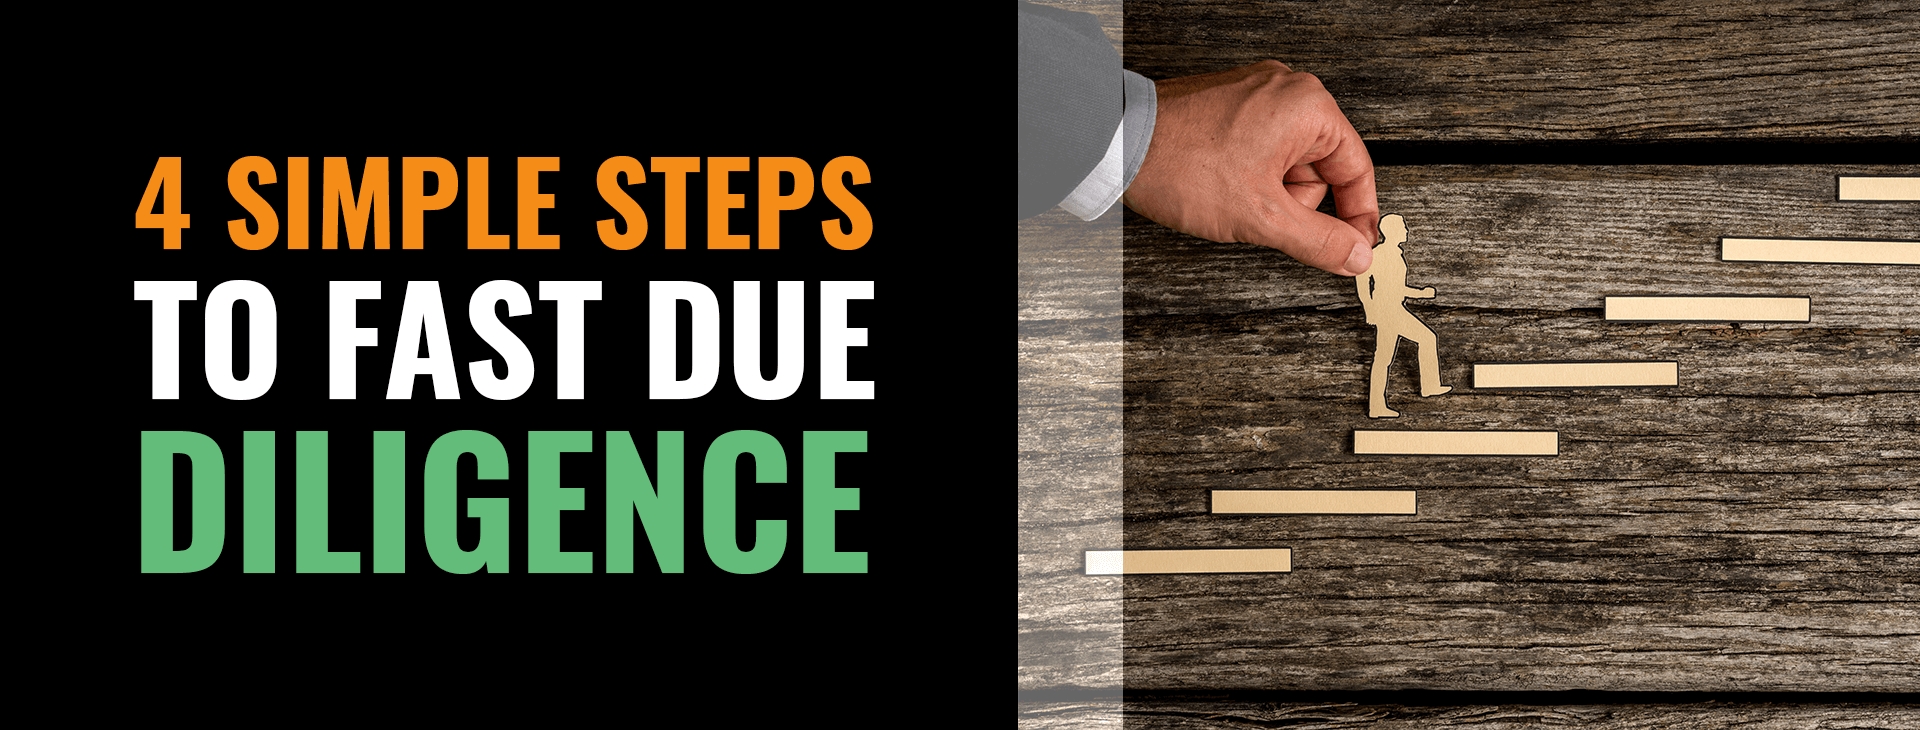 4 Simple Steps To Fast Due Diligence